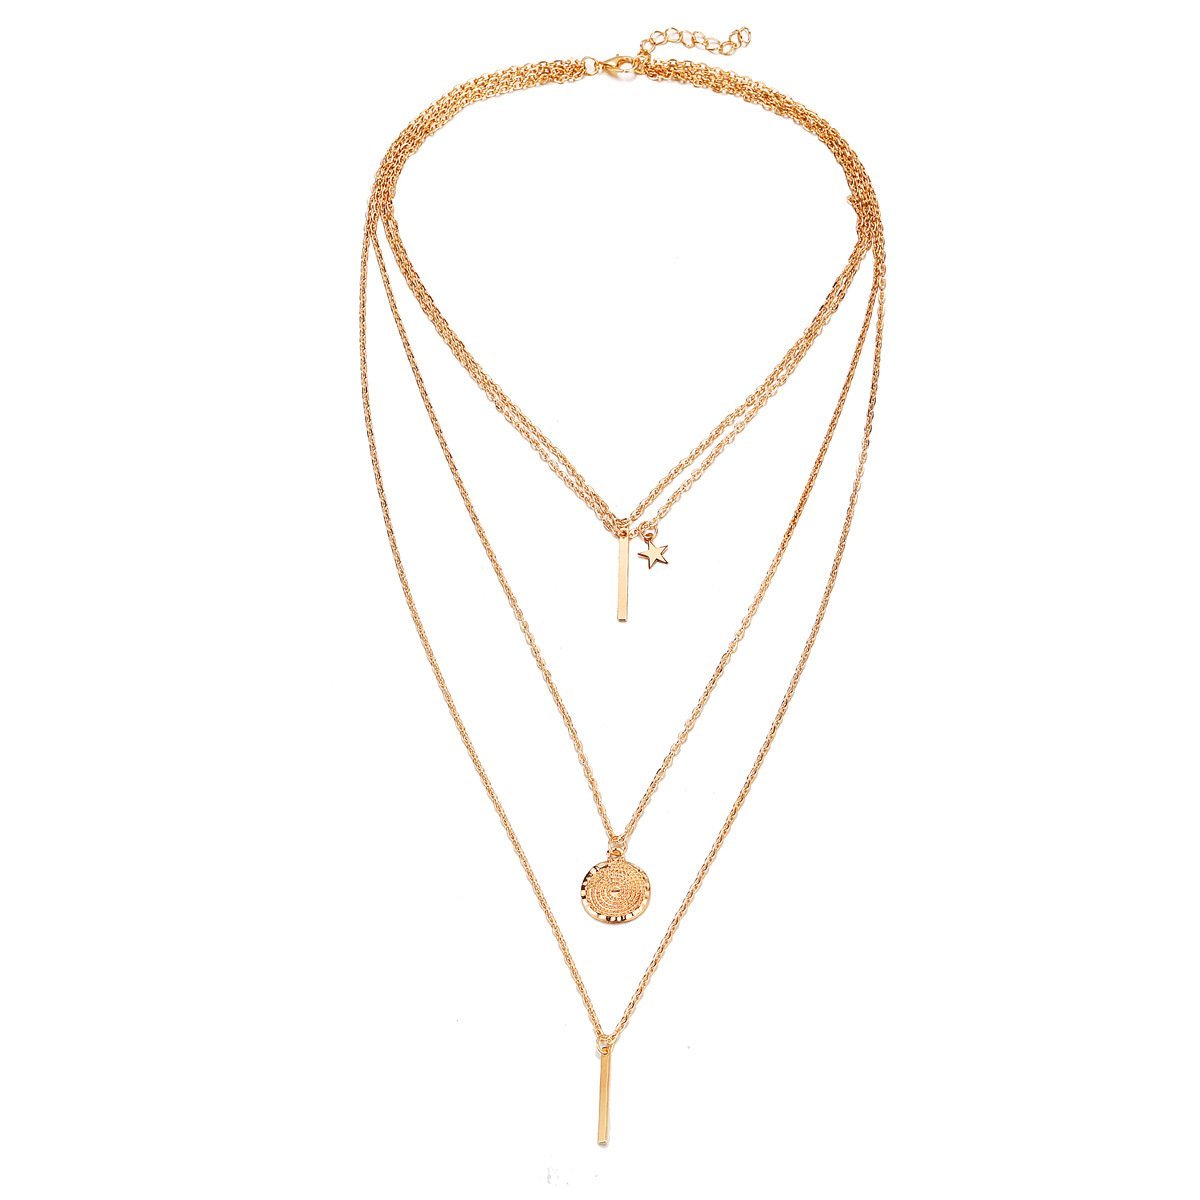 18K Gold Plated Rectangle Drop Necklace - 3 Piece Set, 18" + 2" Extender, Link Chain, Lobster Clasp, Made in Italy Bijou Her